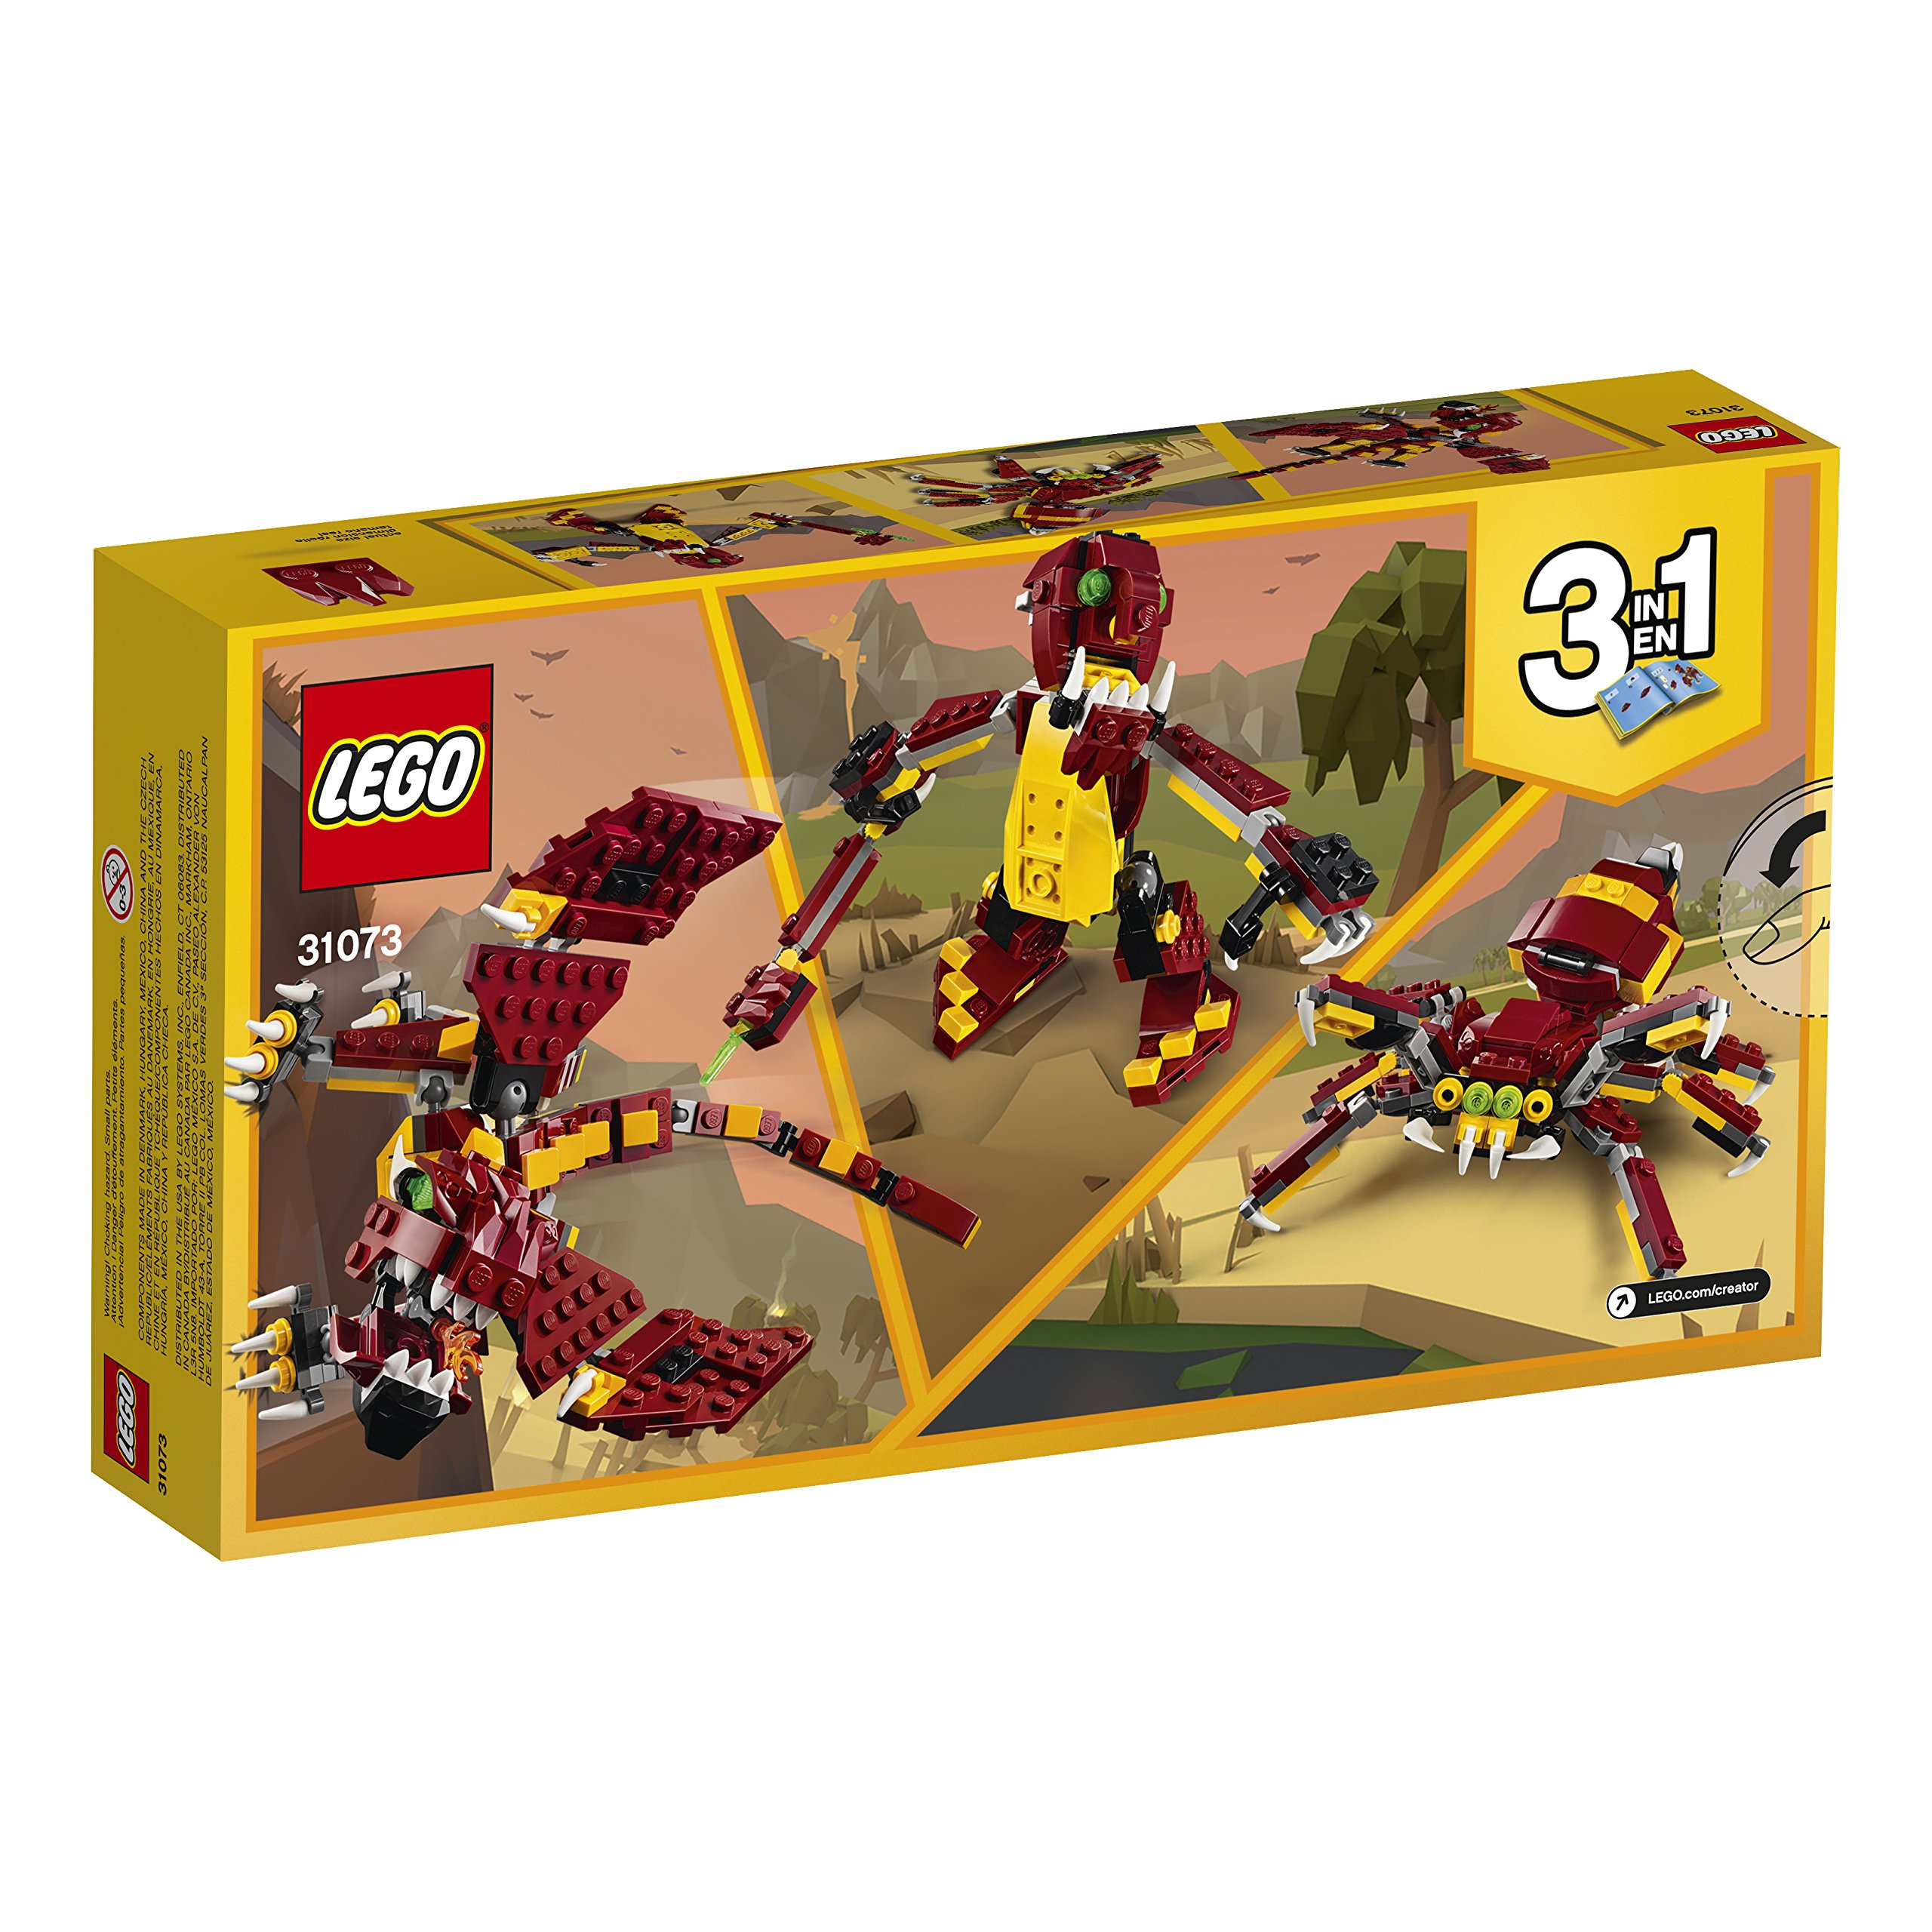 LEGO Creator 3in1 Mythical Creatures 31073 Building Kit (223 Pieces) (Discontinued by Manufacturer)